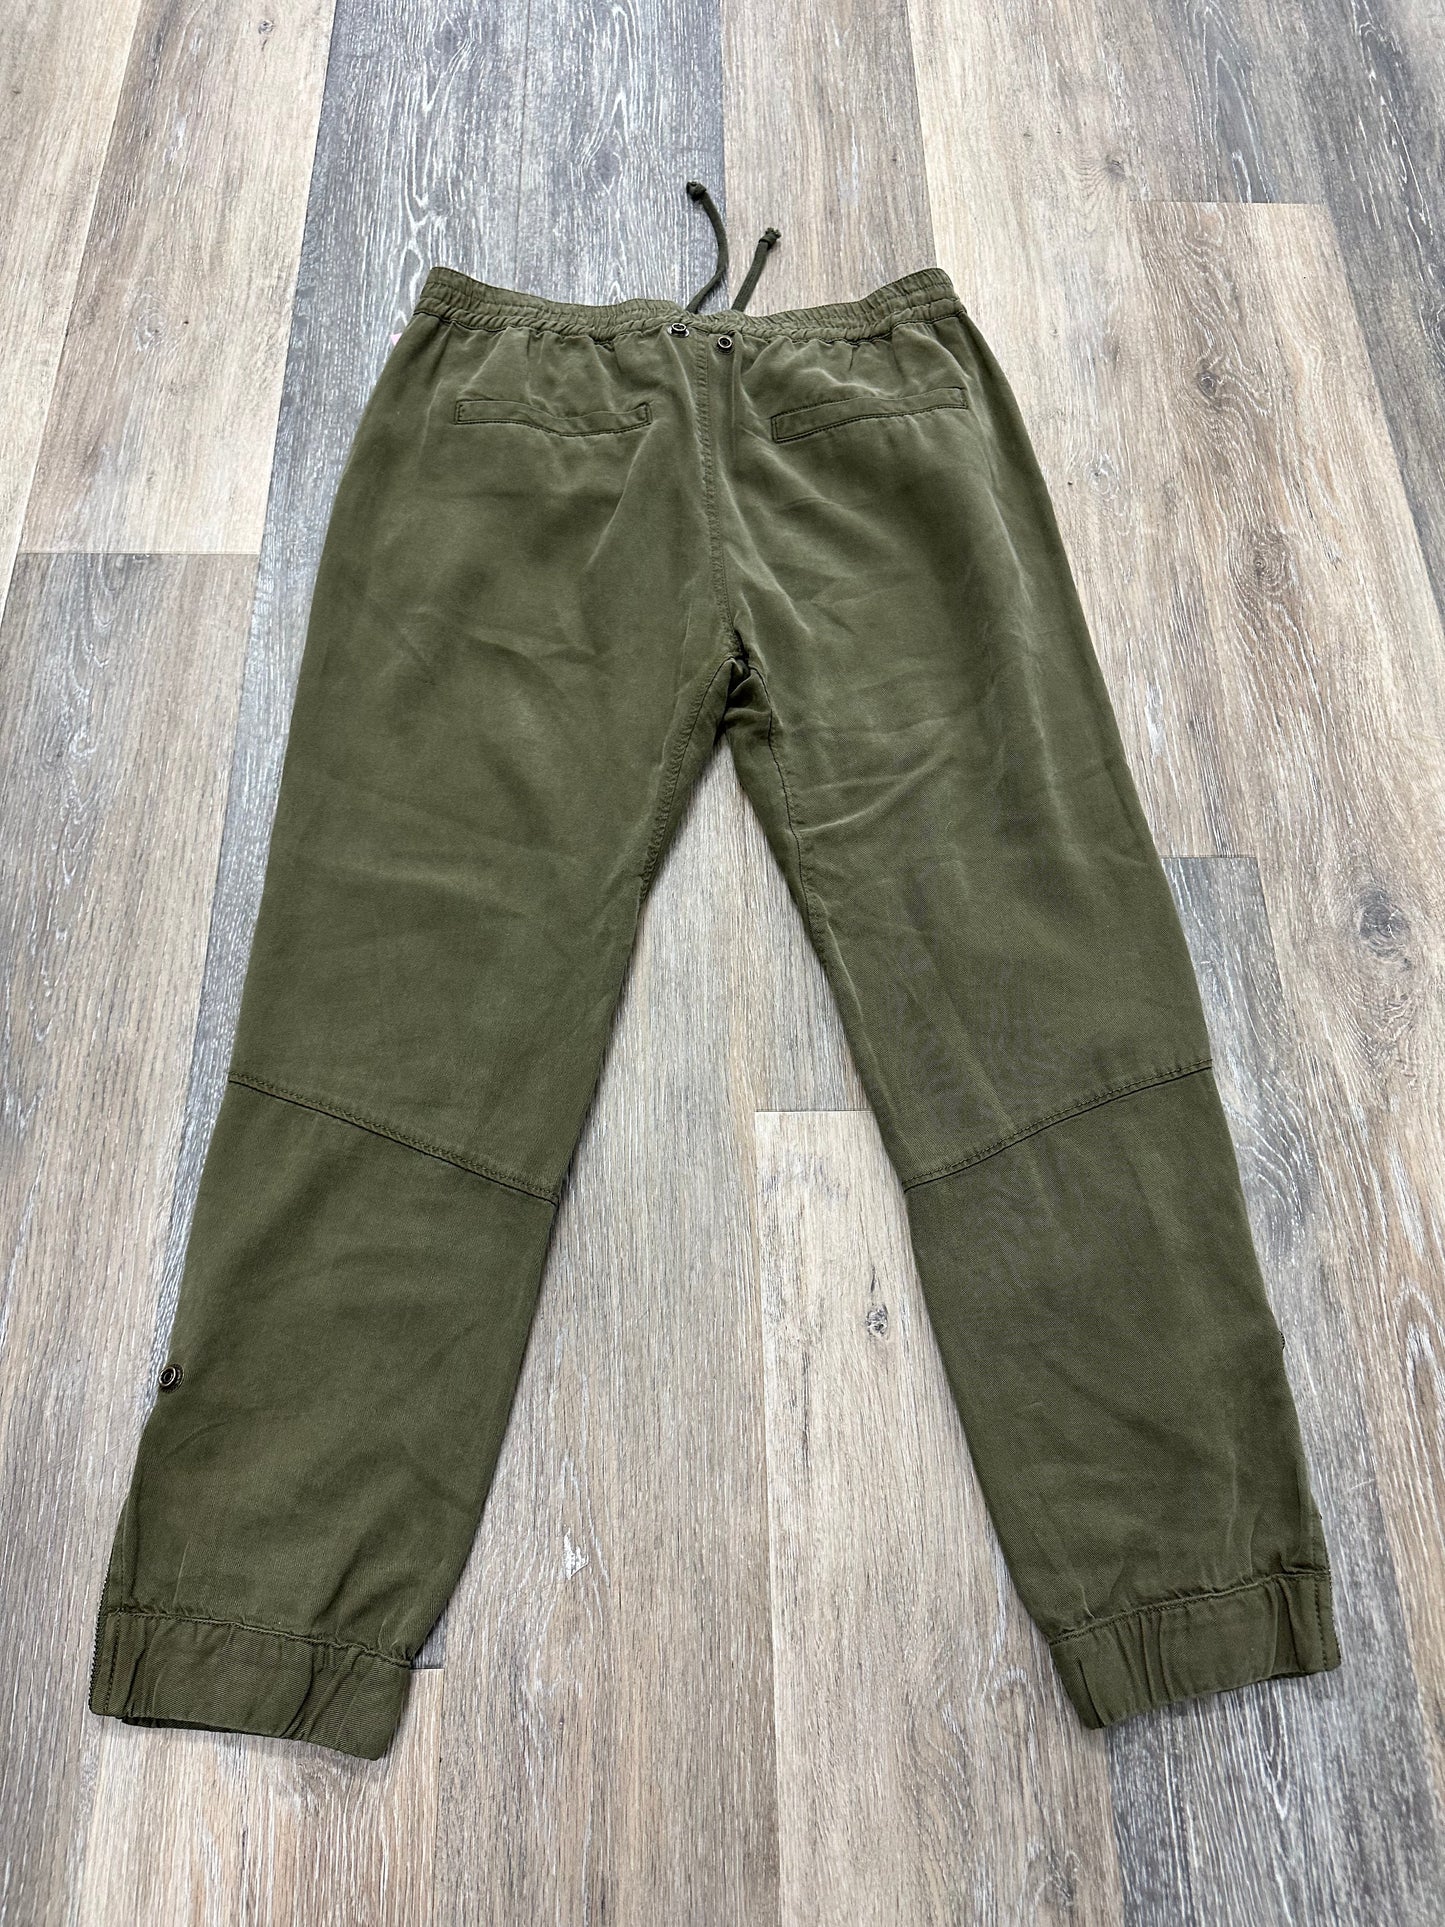 Pants Cargo & Utility By Pam and Gela  Size: S